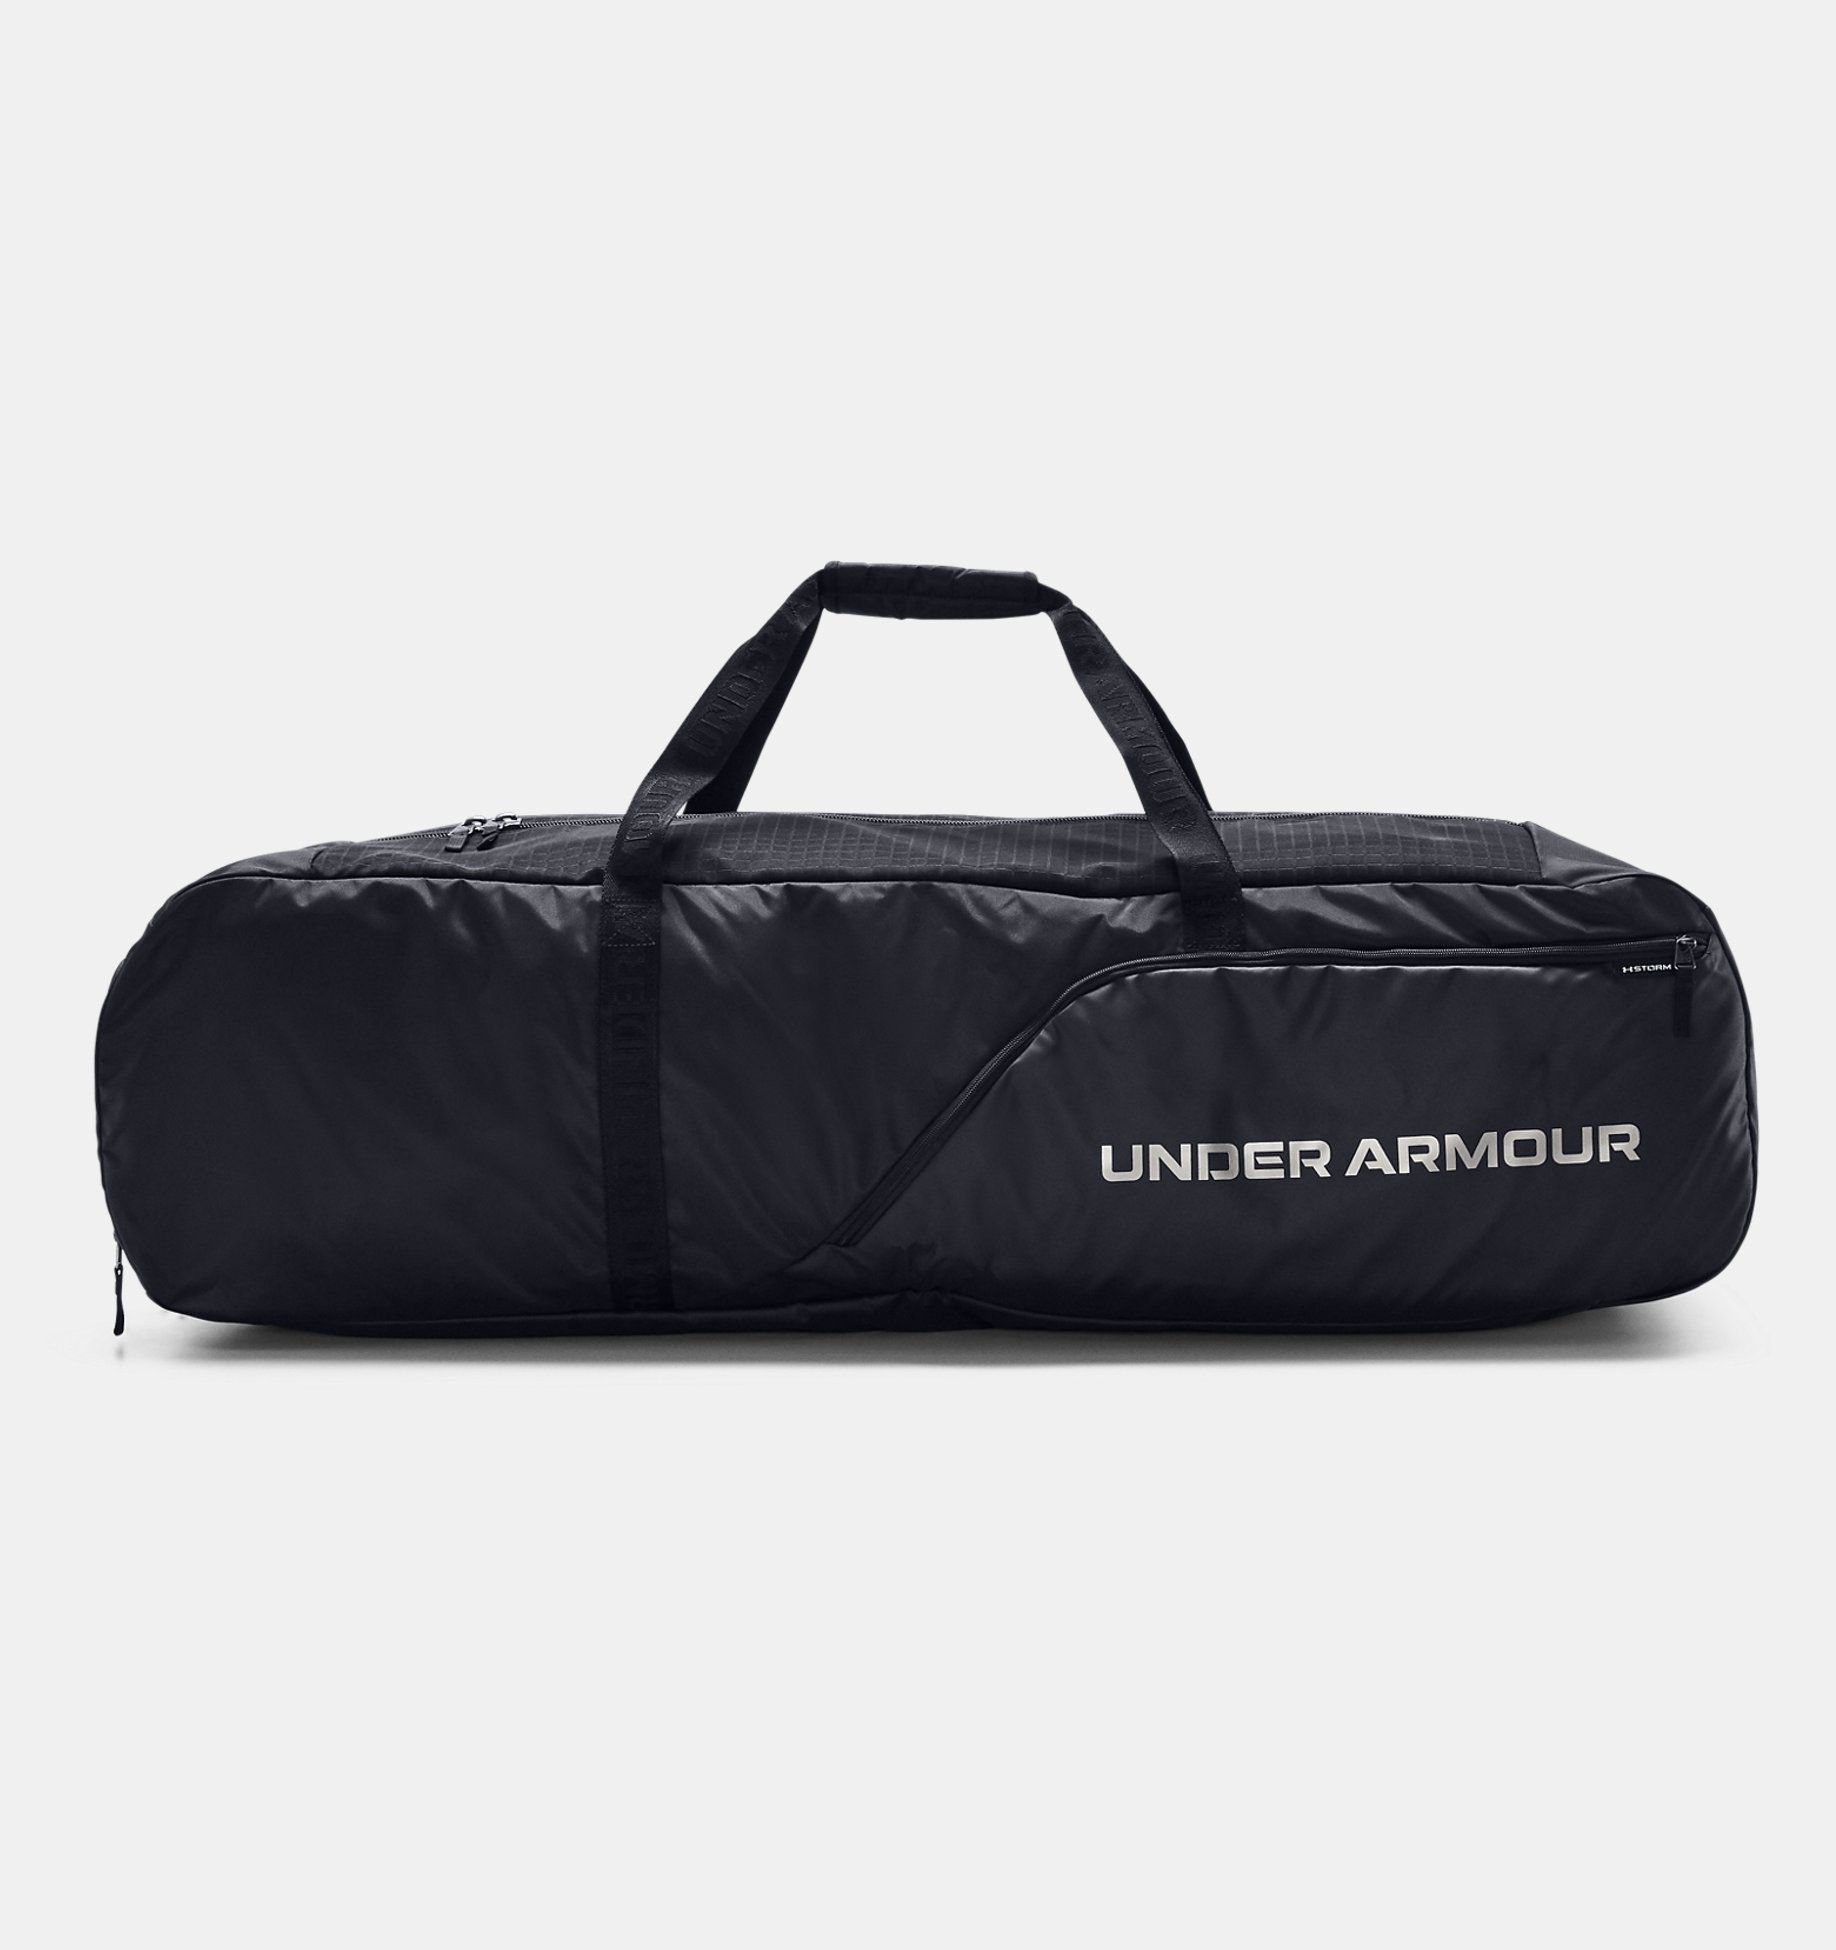 Under Armour Storm Lacrosse LAX Travel Bag 44” x 7” x 12” Red 